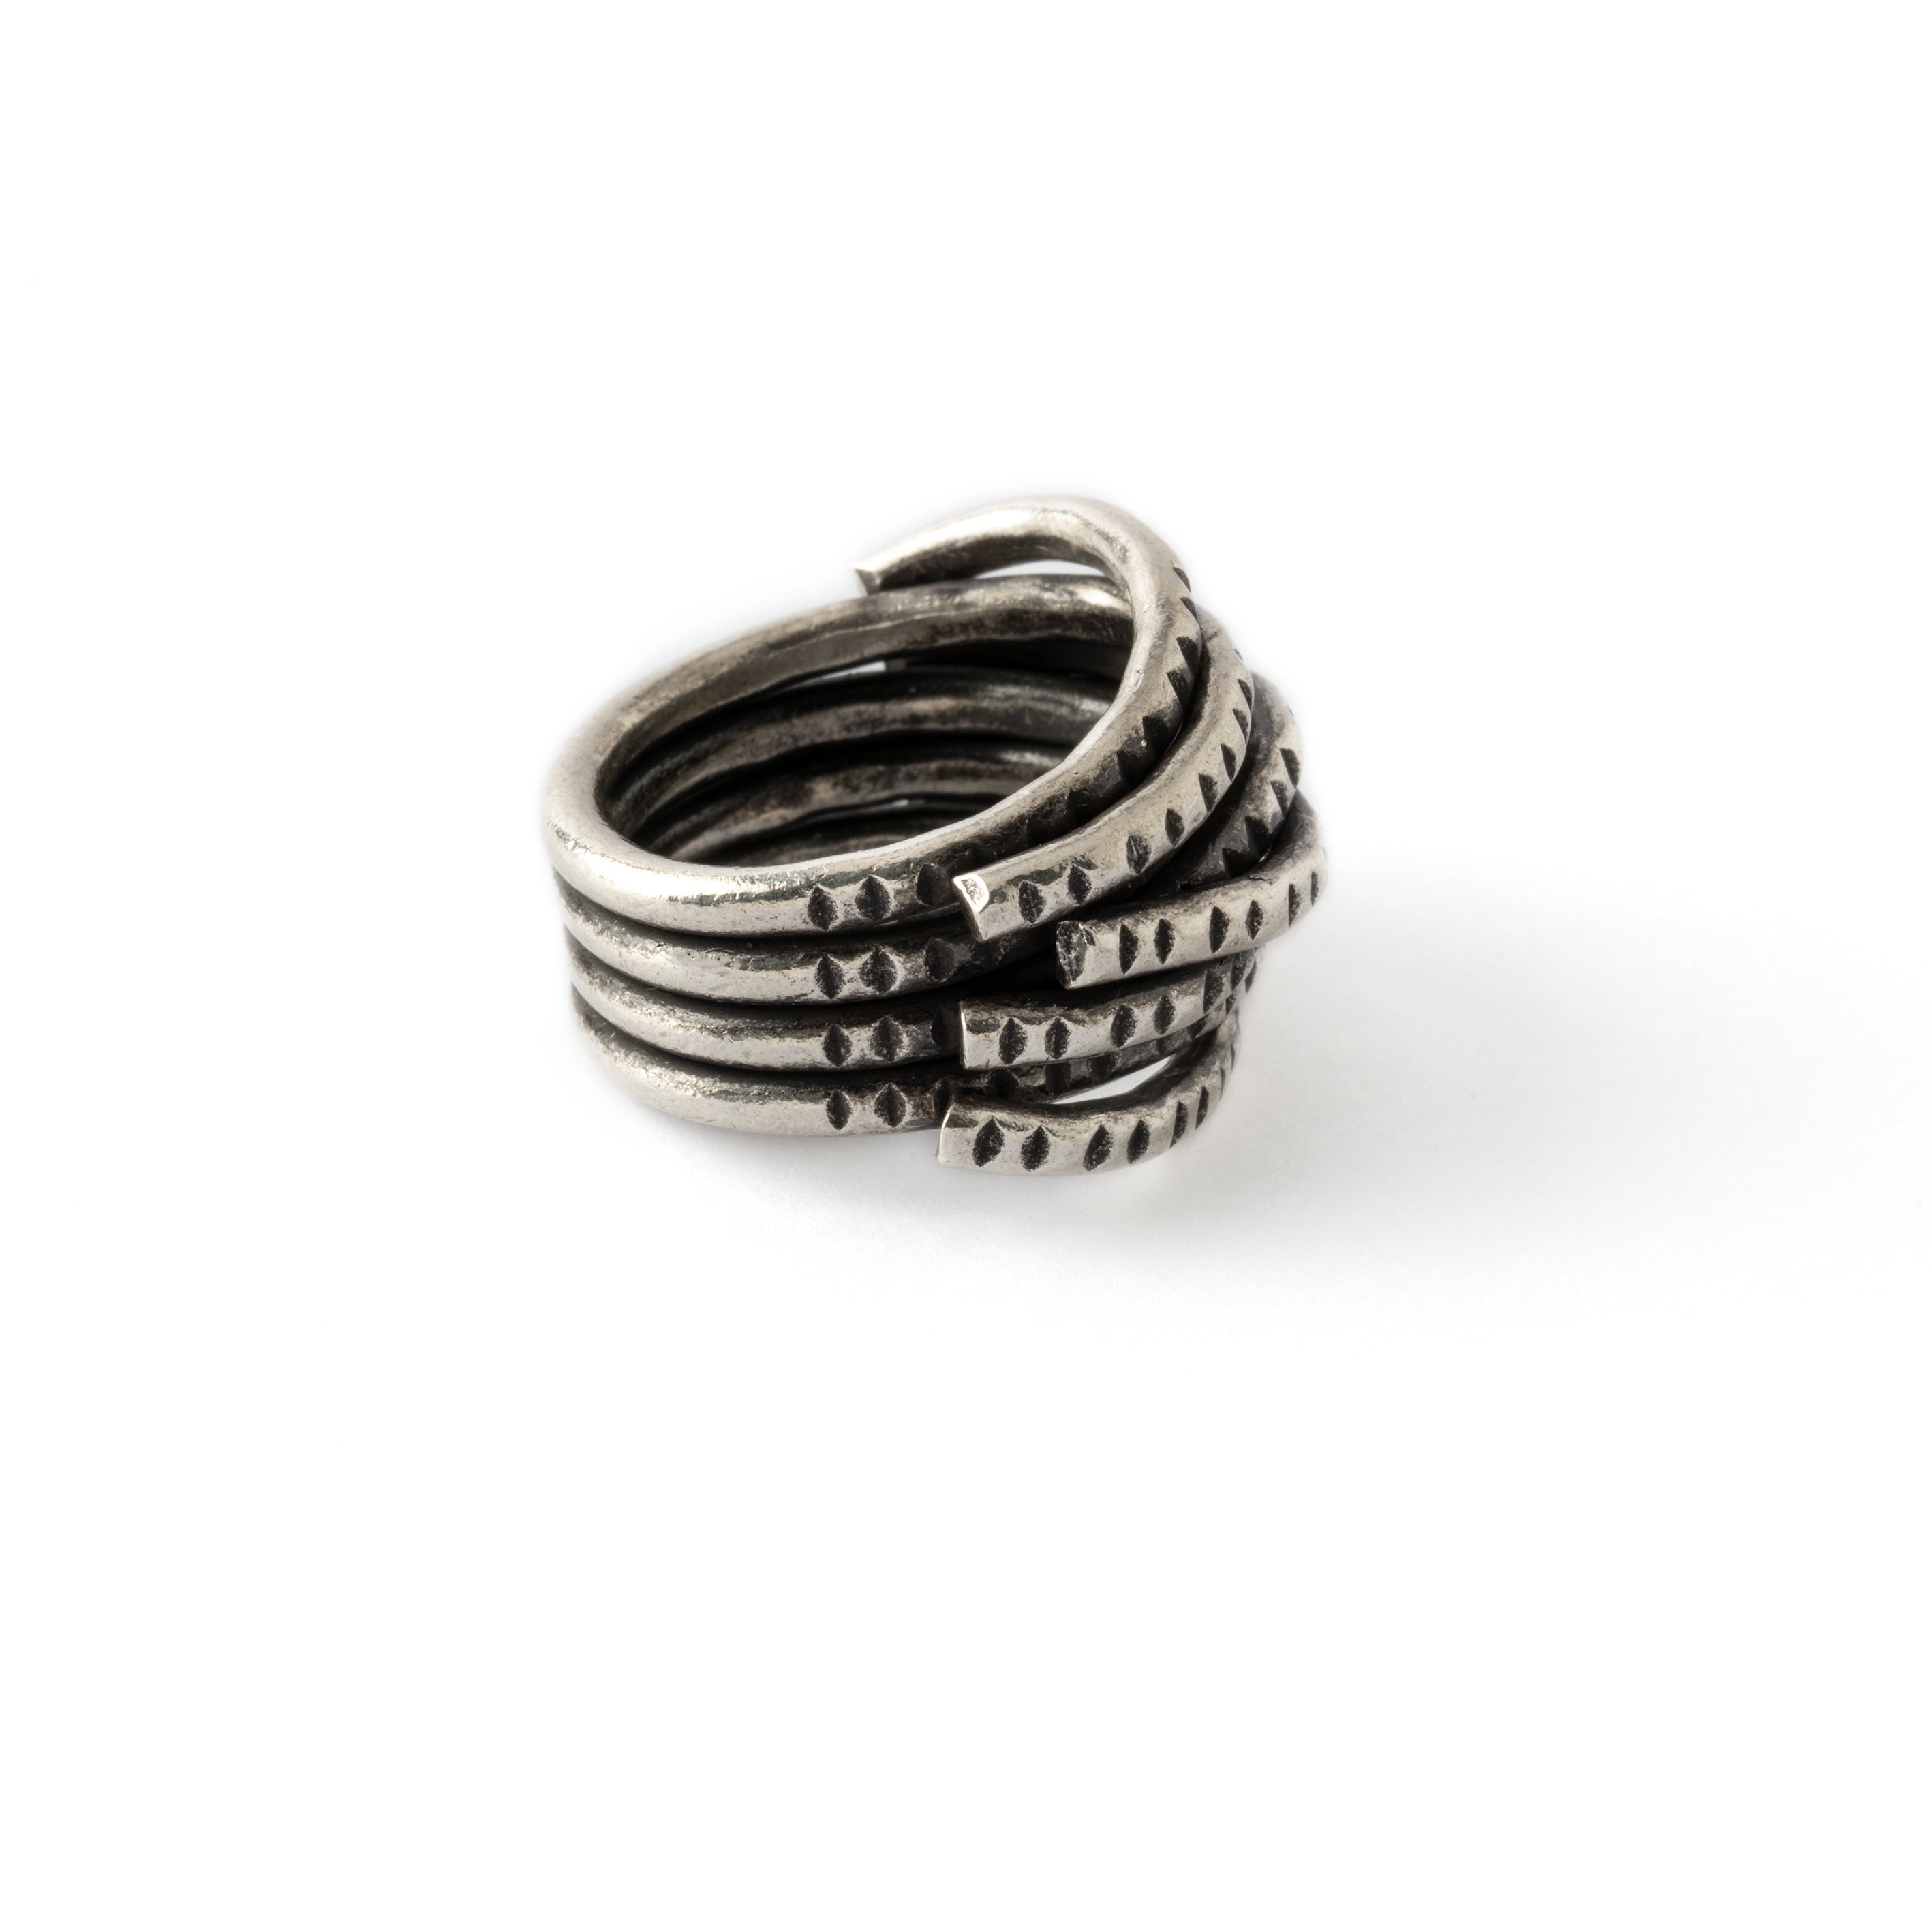 95% tribal silver chunky ring with layered design right side view